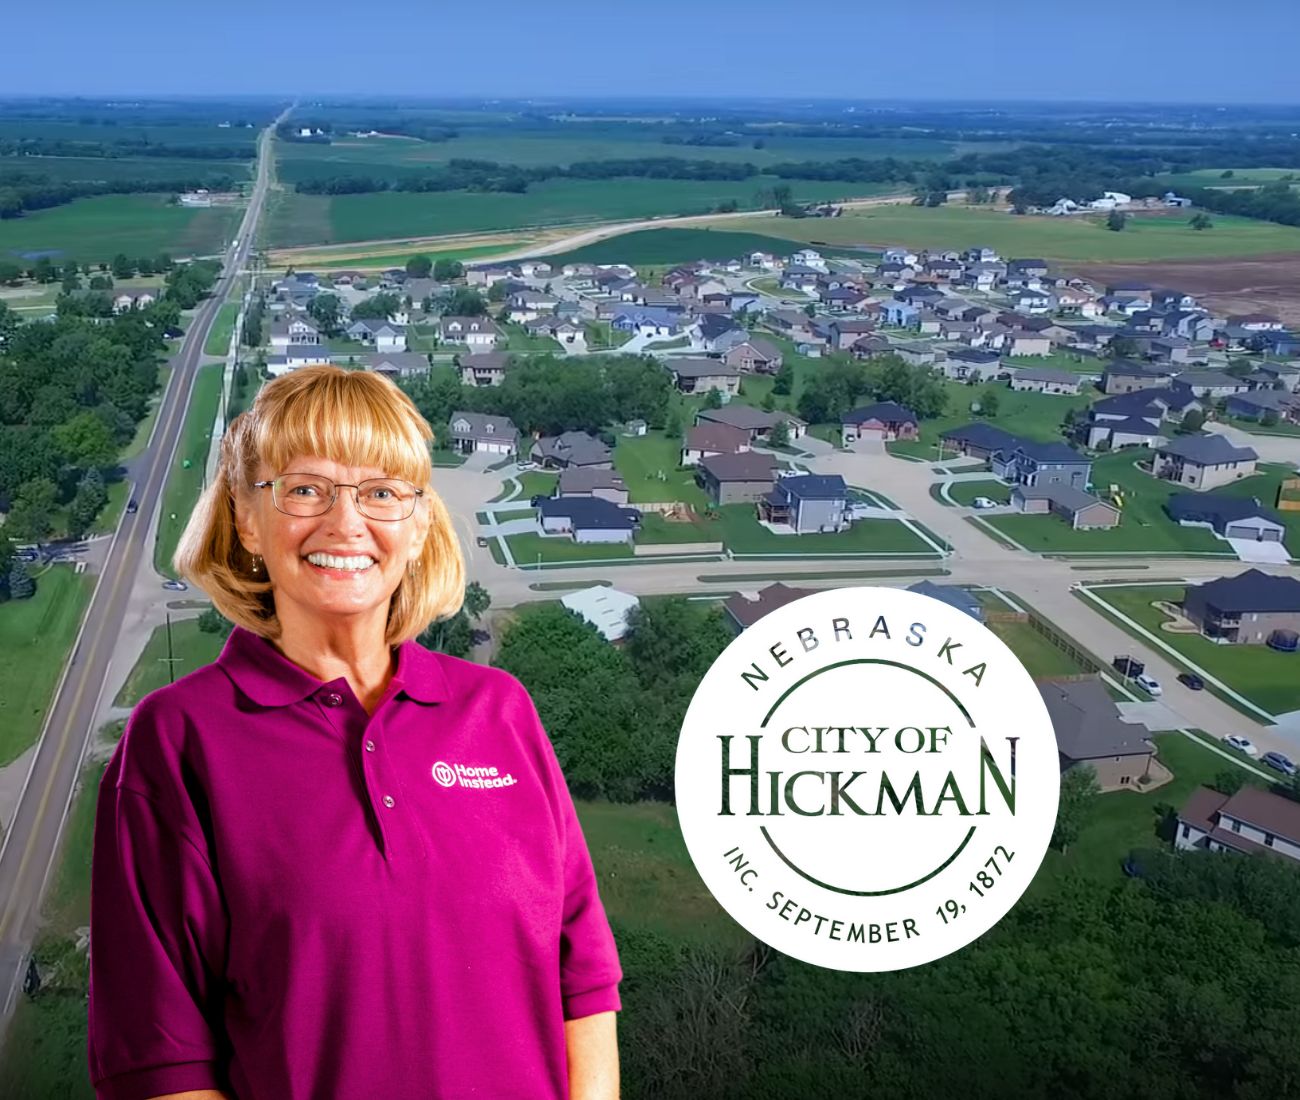 Home Instead caregiver with Hickman Nebraska in the background